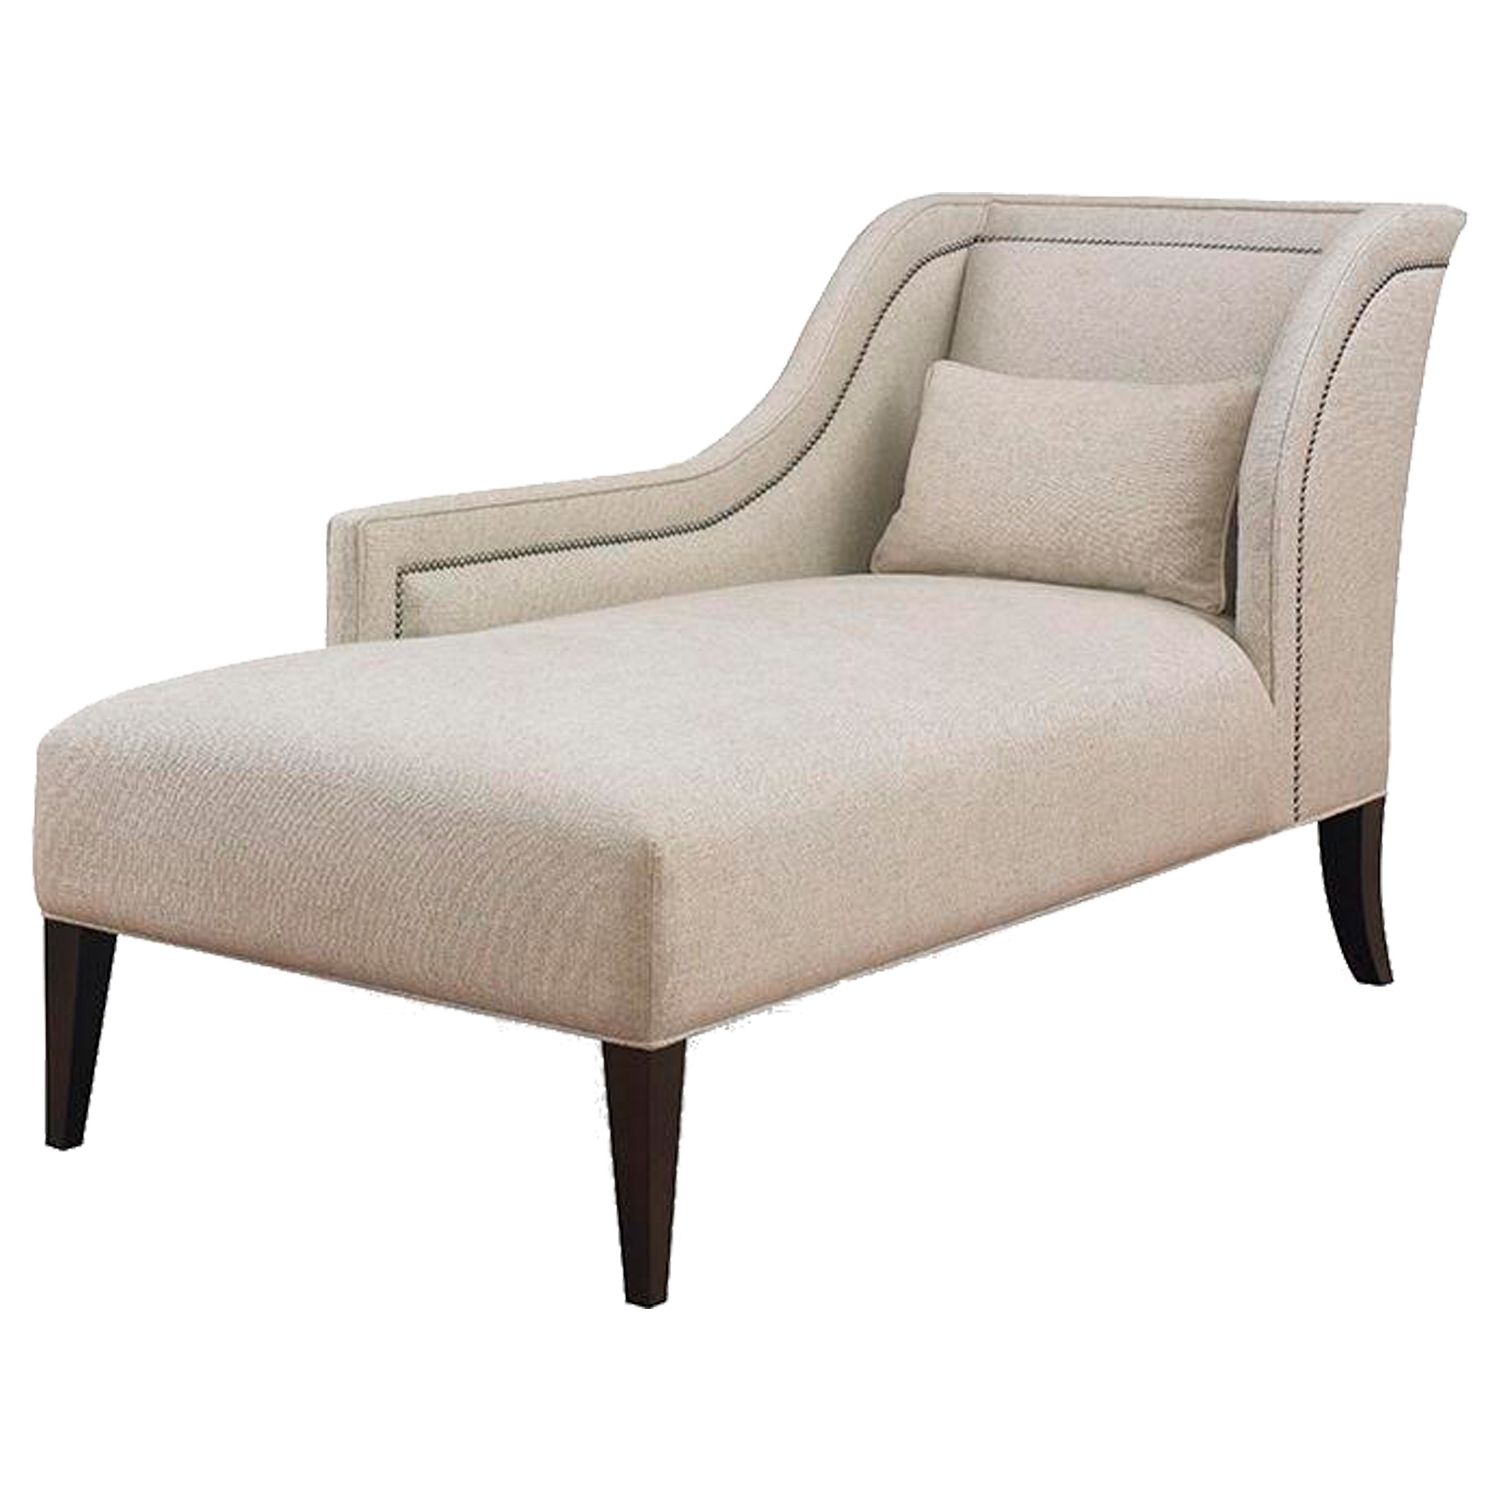 2018 Buy Pasadena One Arm Chaisekravet – Made To Order Designer In Chaise Lounge Chairs With Arms (View 12 of 15)